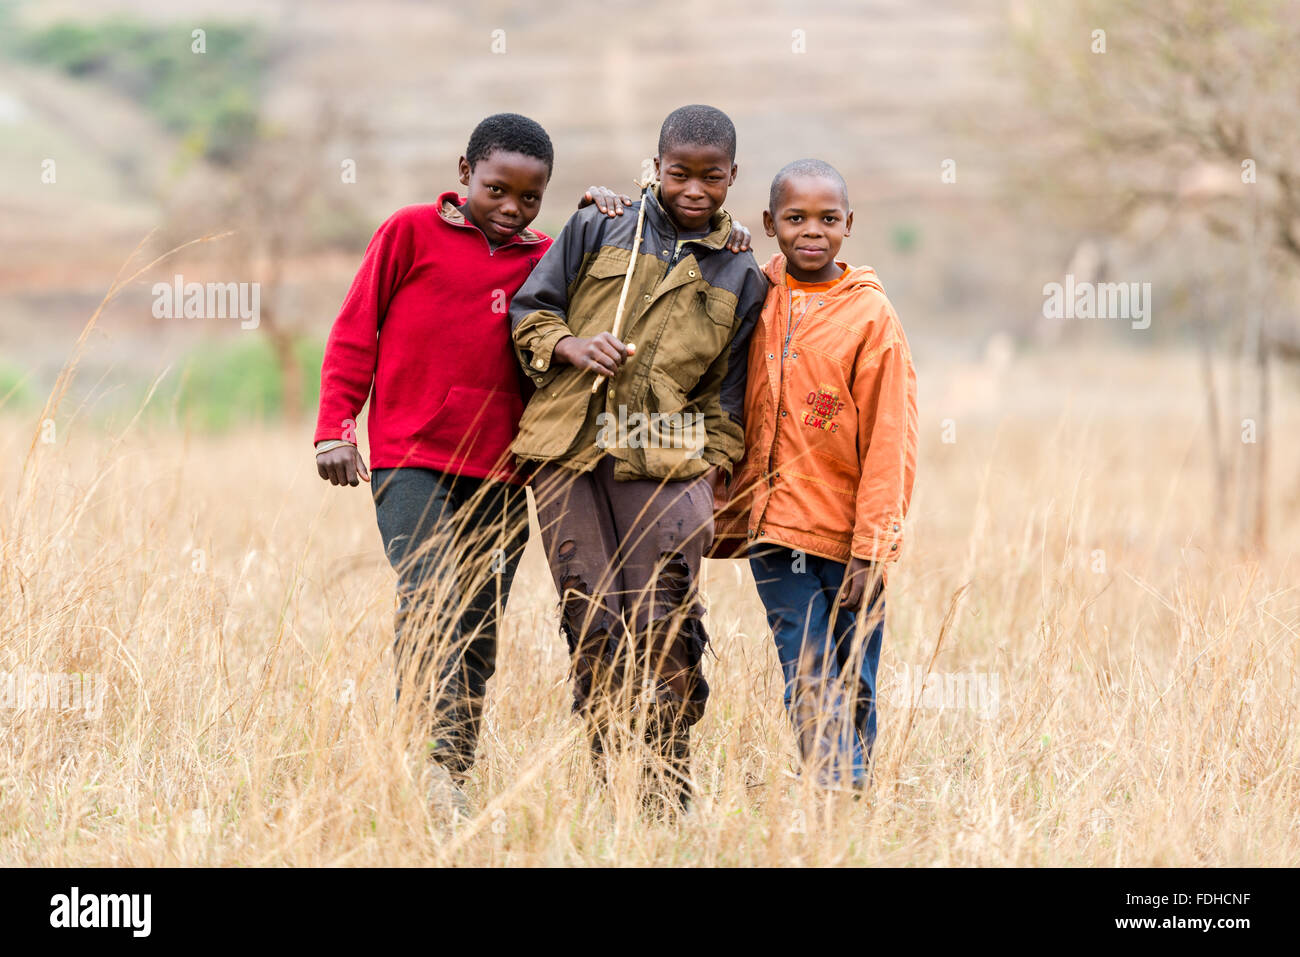 Three young boys standing in a field in the Hhohho region of Swaziland, Africa. Stock Photo